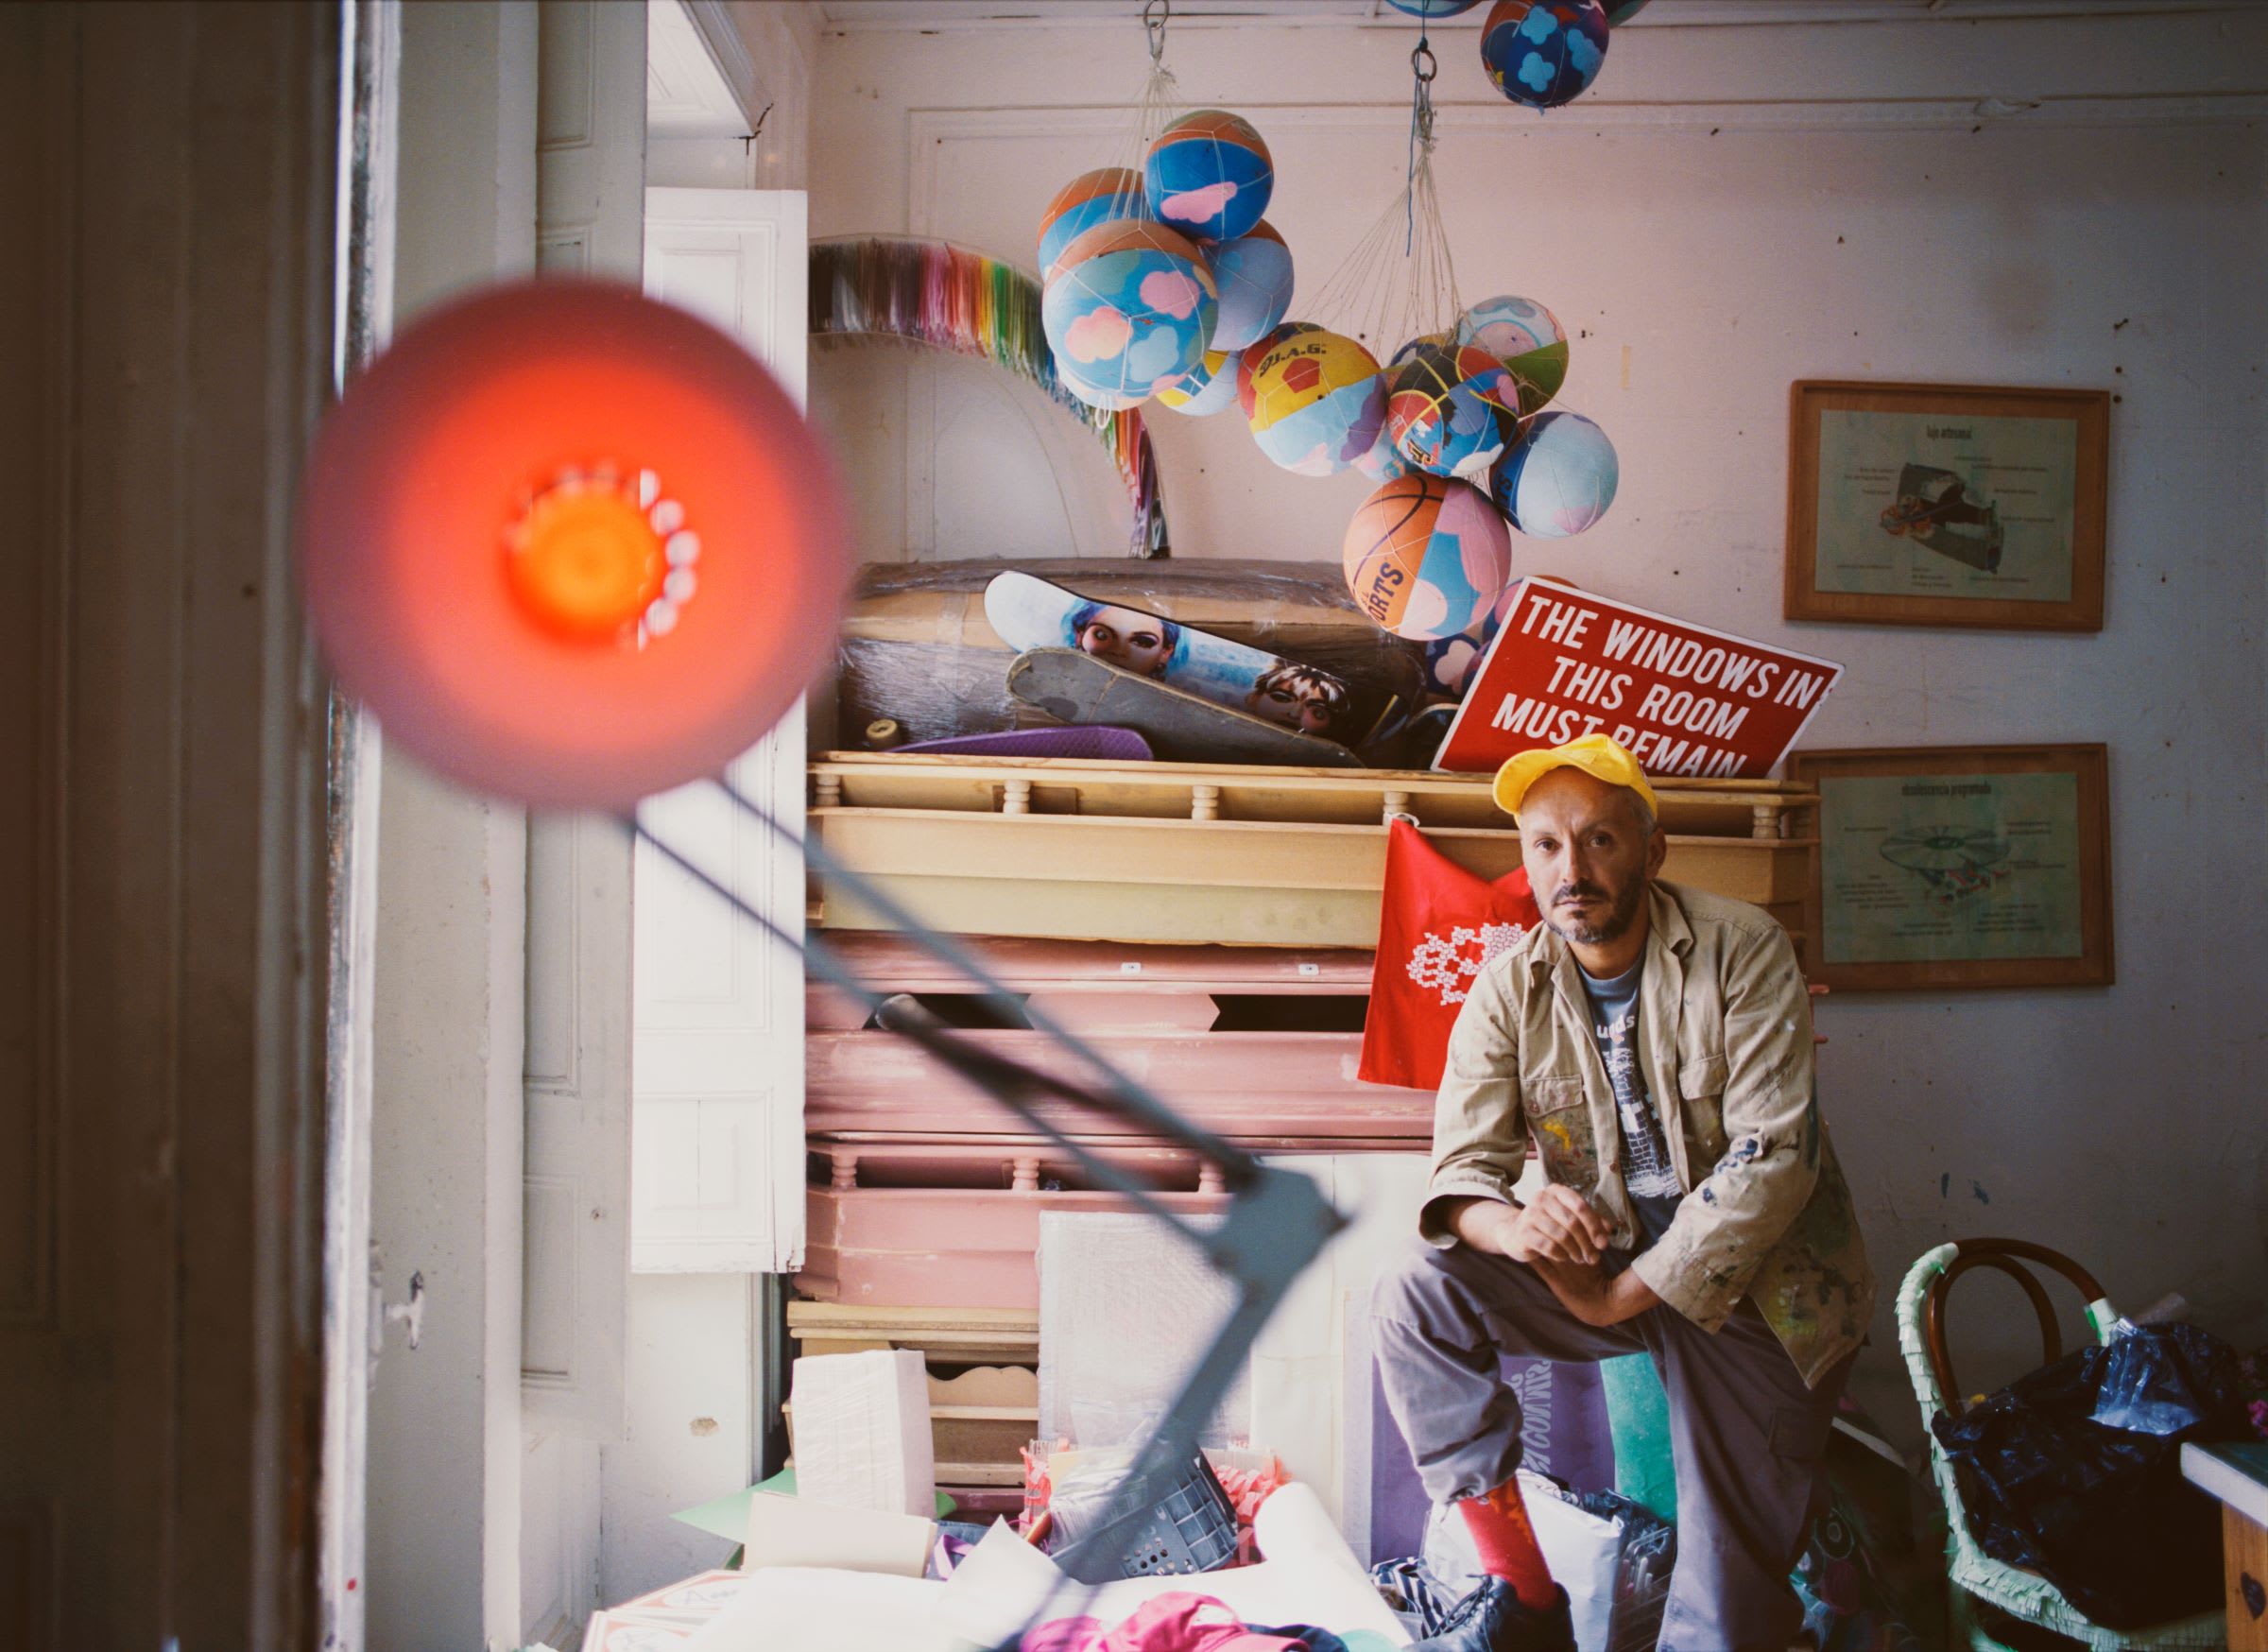 Artist Paulo Licona in his Bogotá studio. Photography by Faber Franco for Art Basel.